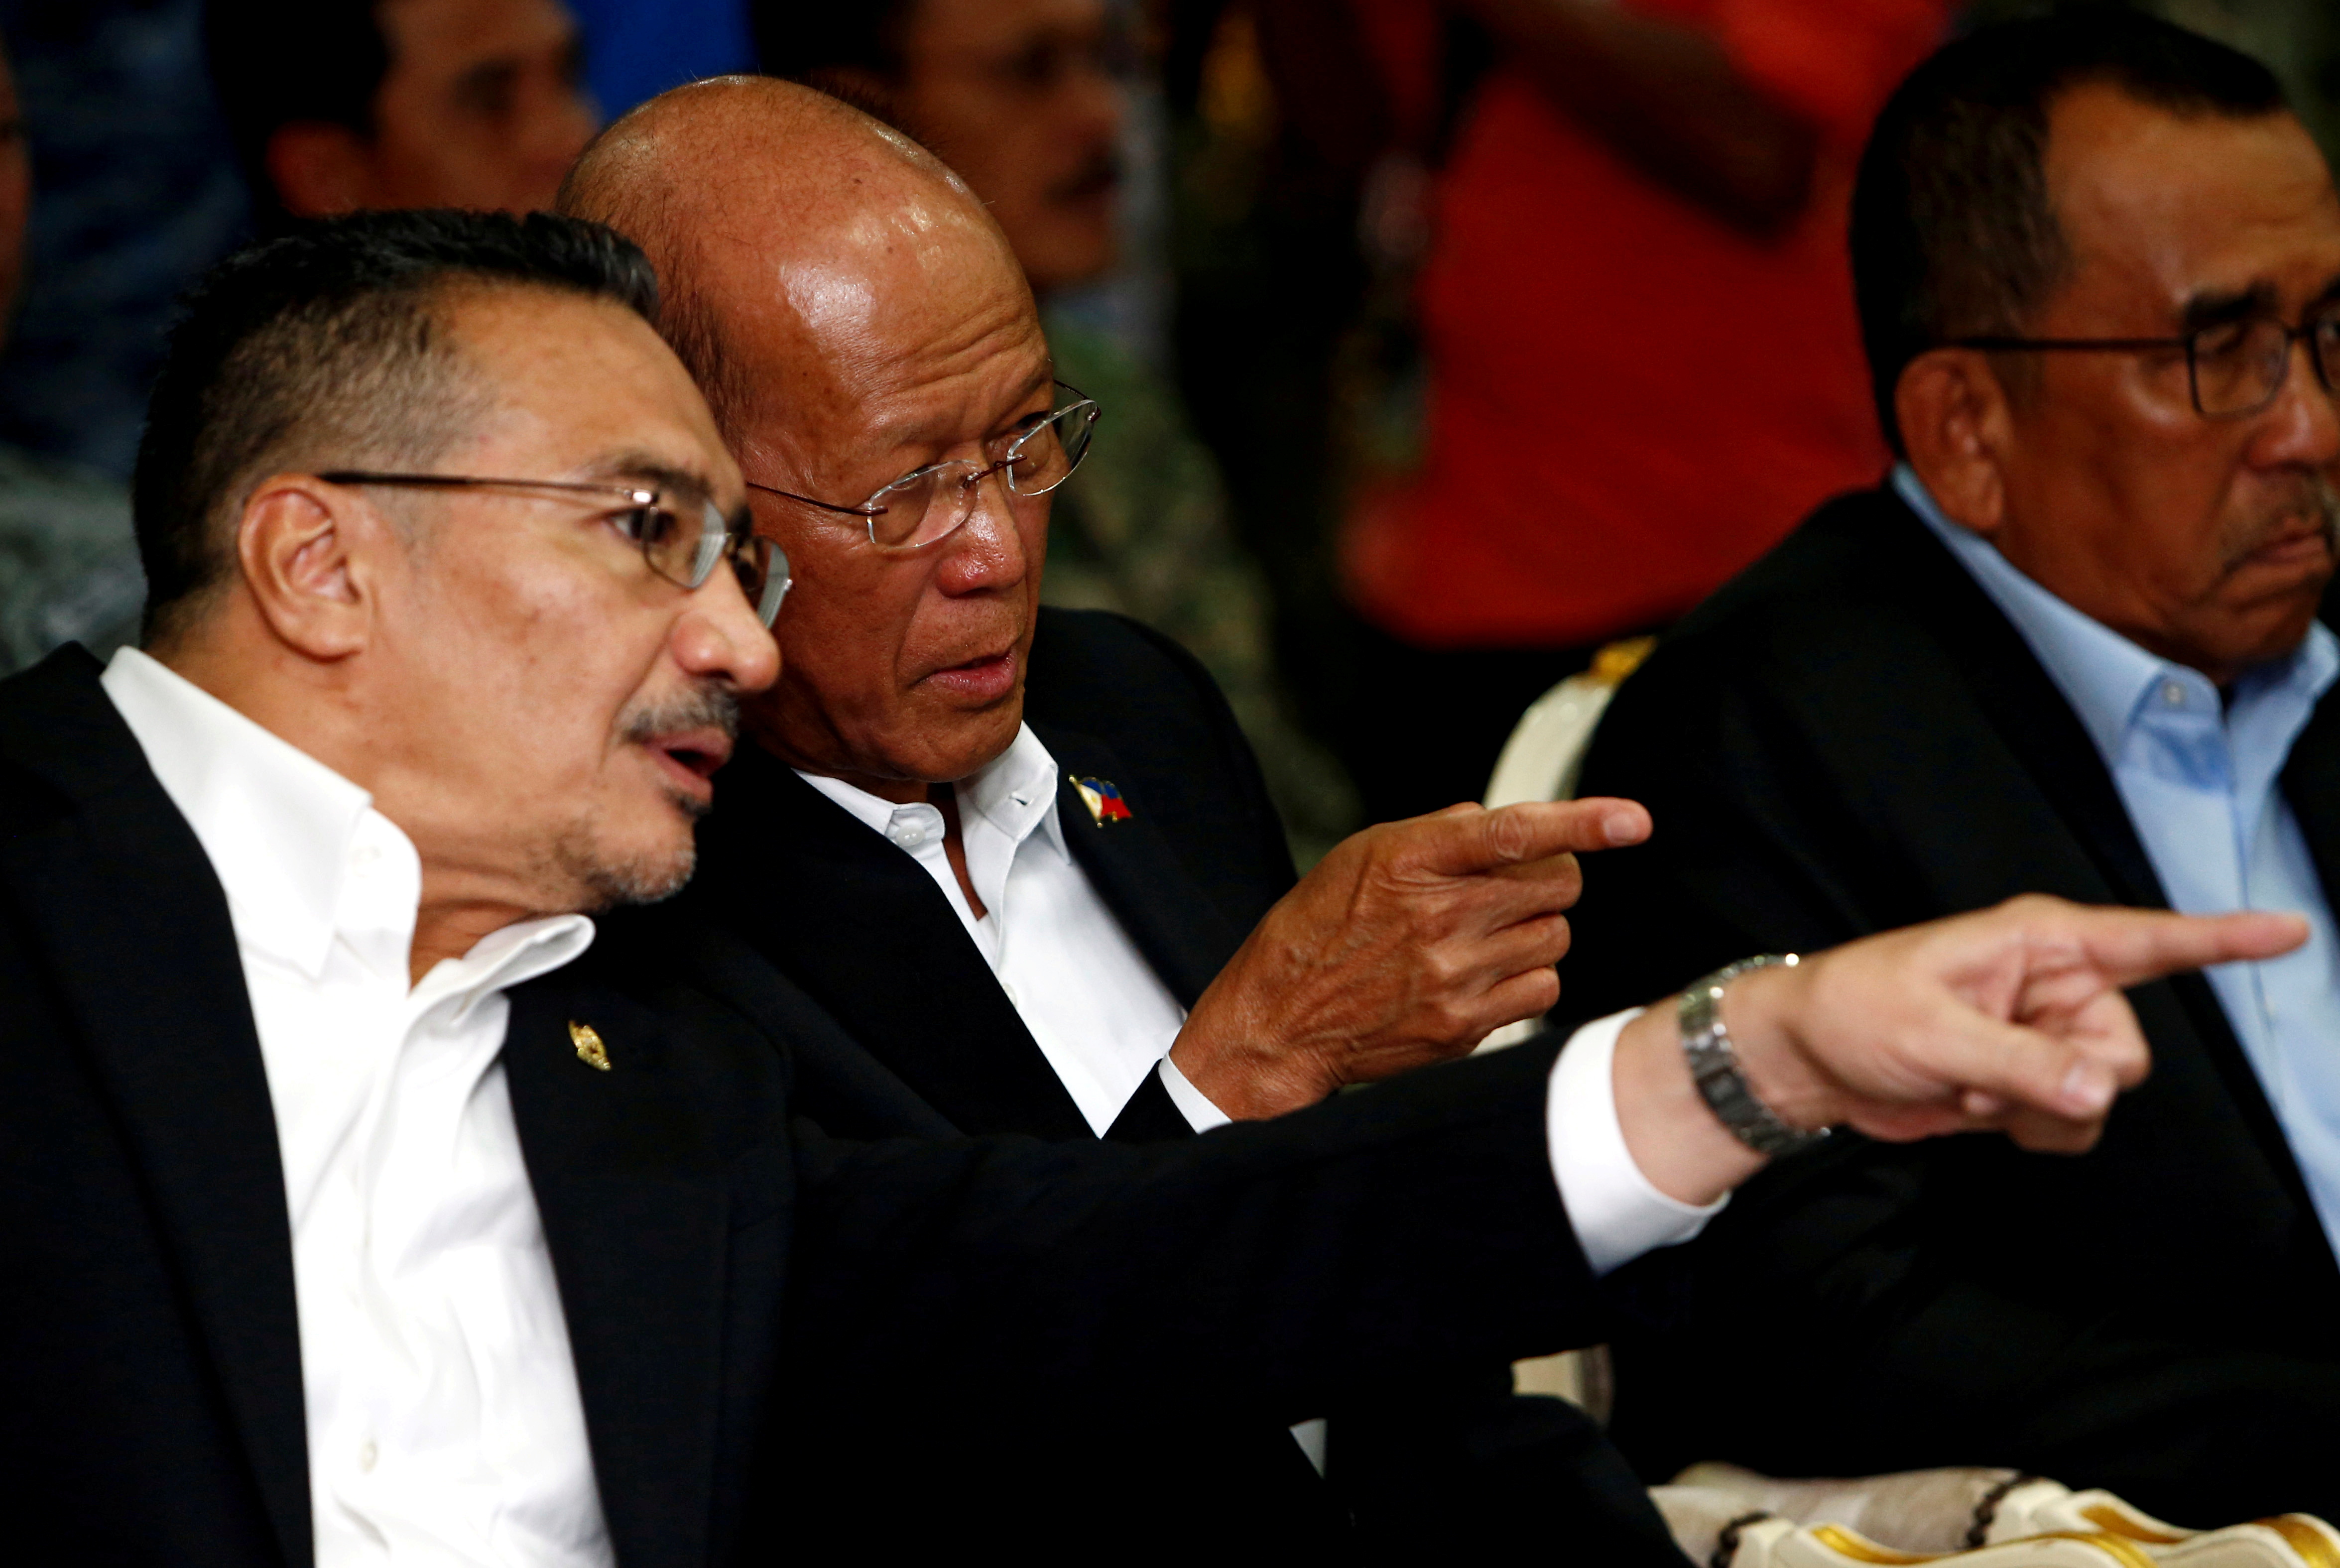 Malaysia's Defence Minister Hishammuddin Hussein speaks to Philippines's Secretary of National Defence Delfin Lorenzana during the launch of the Trilateral Air Patrol at the Royal Malaysian Air Force base in Subang